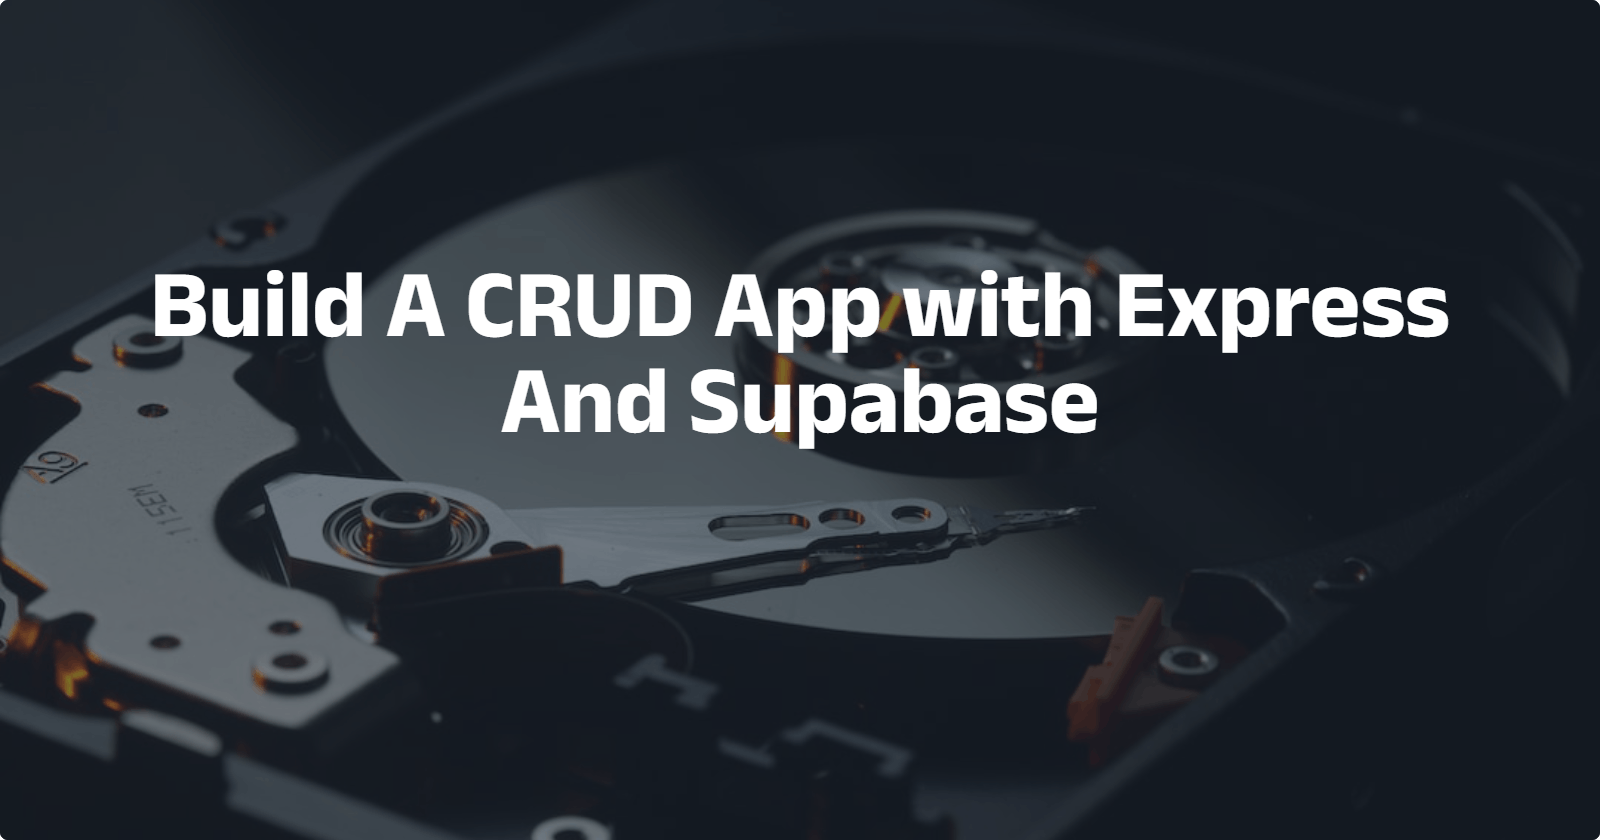 Build A CRUD App with Express And Supabase